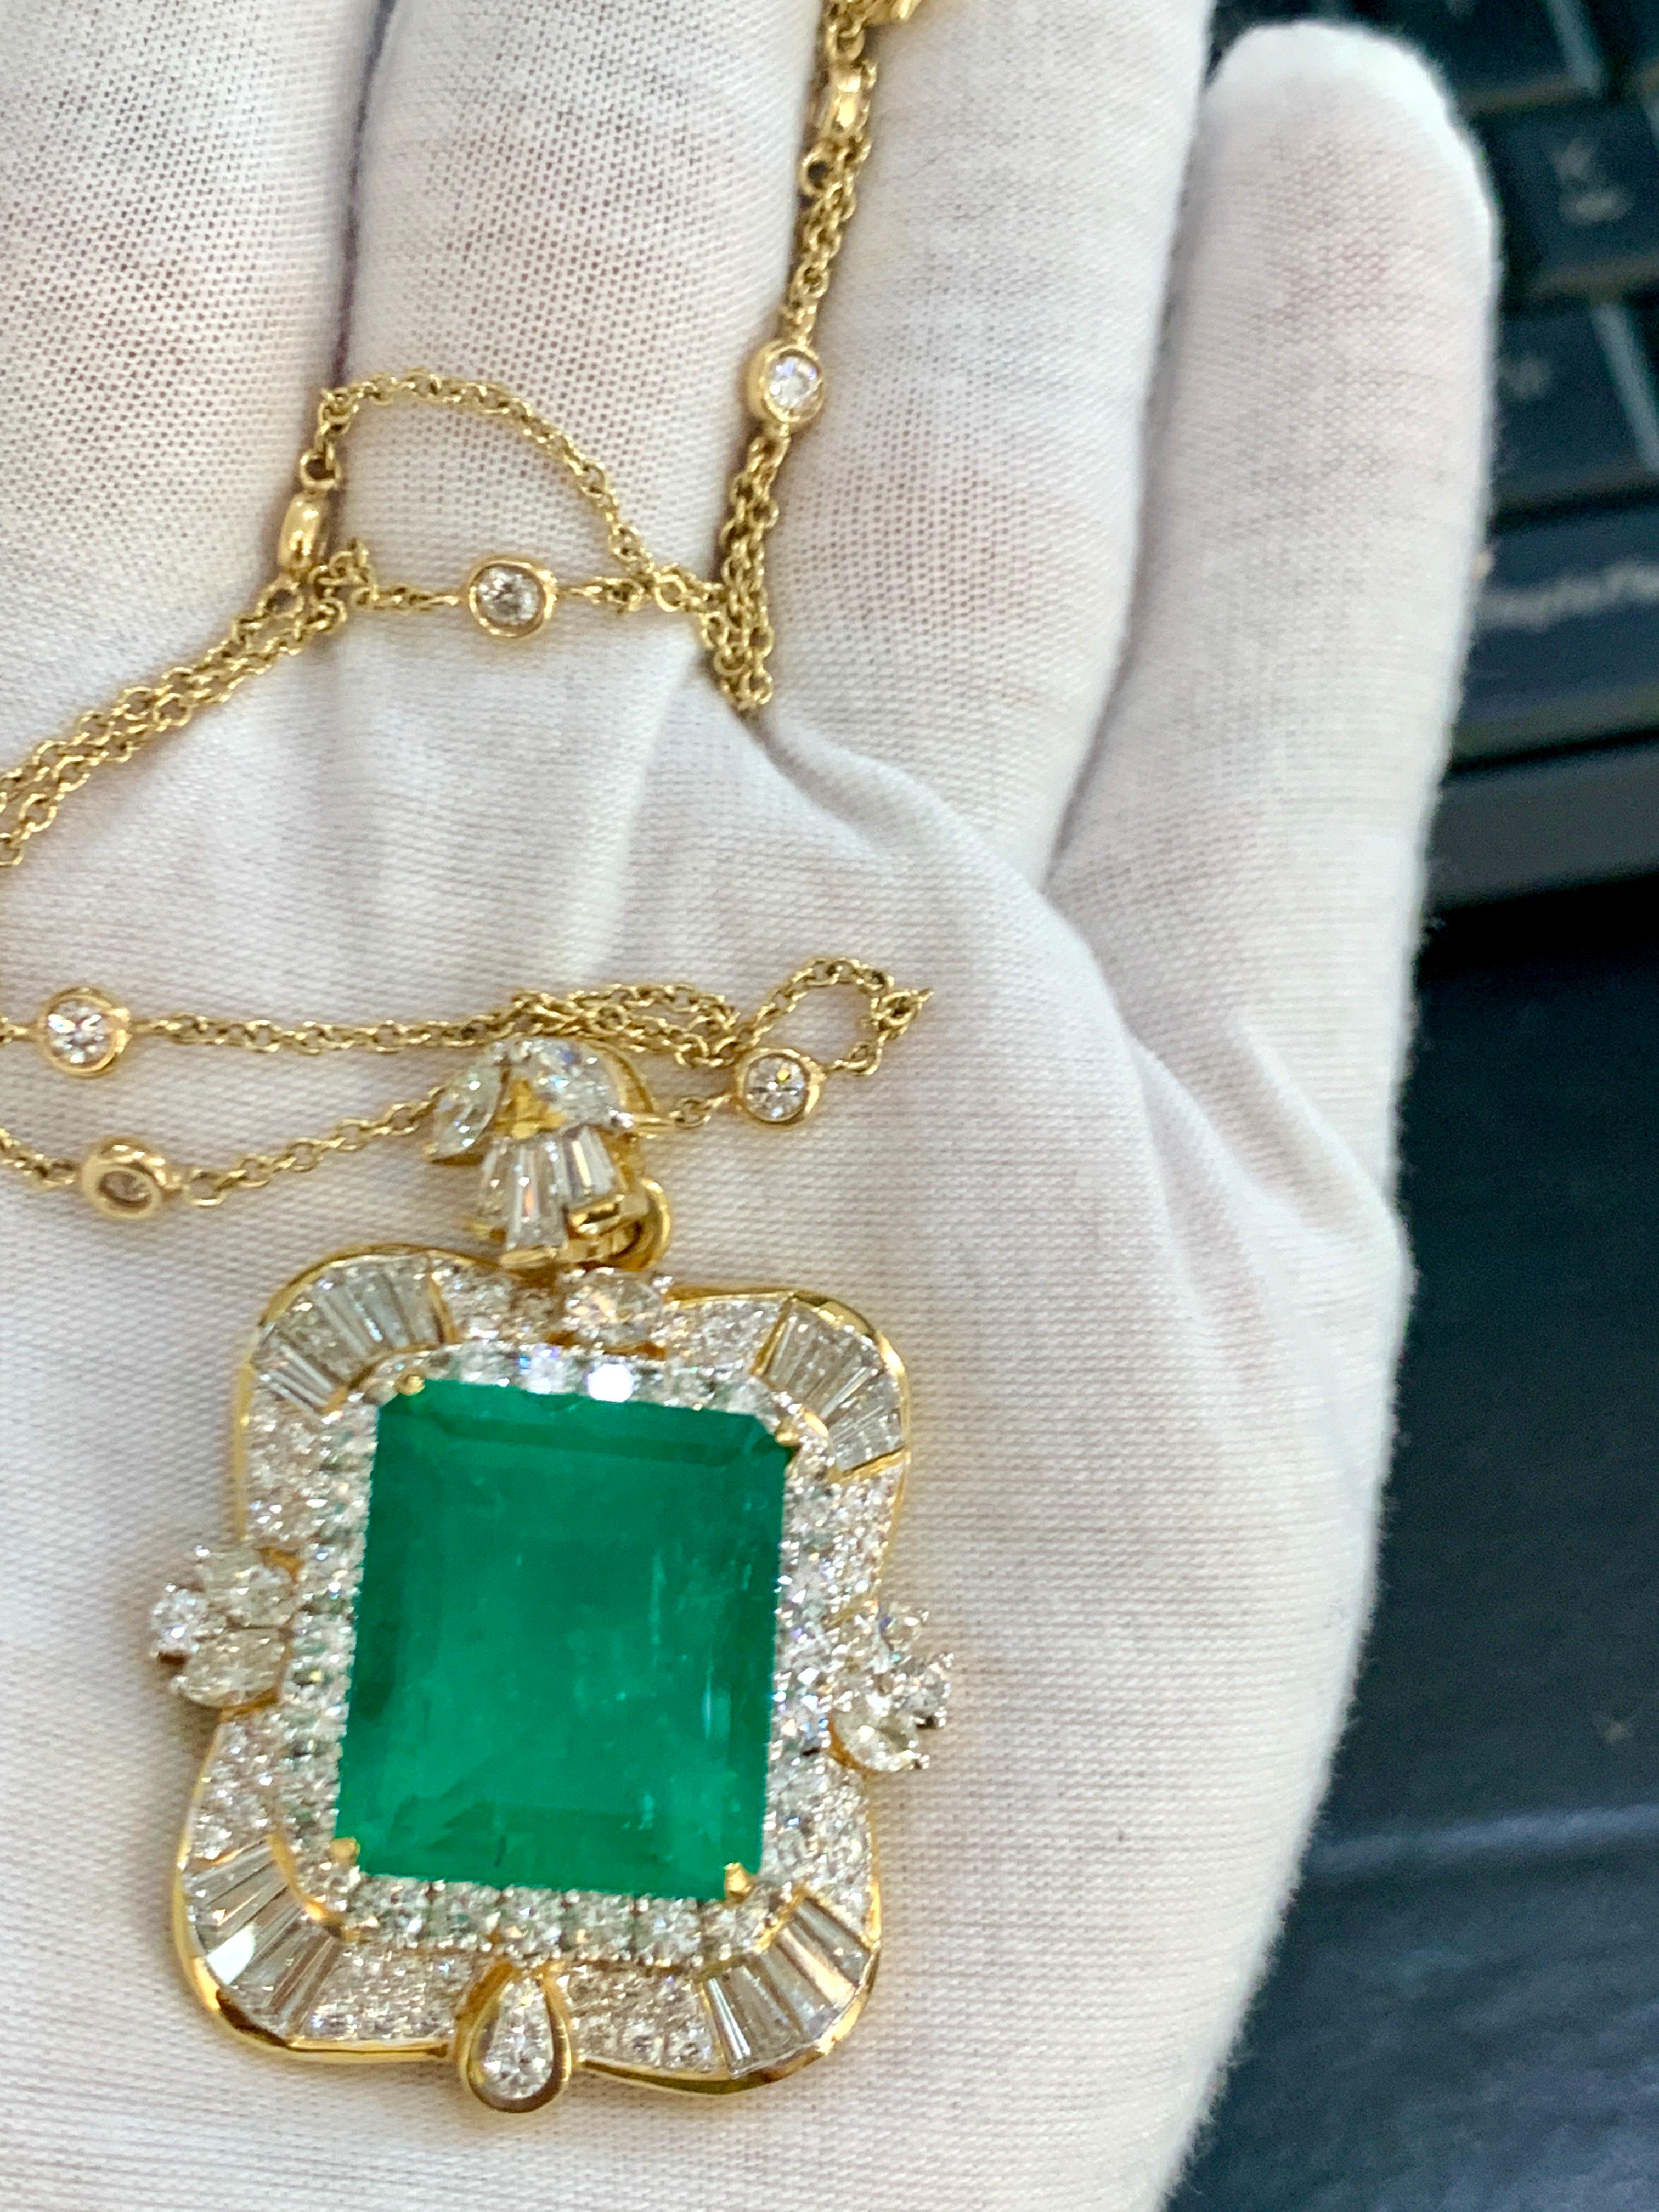 AGL Certified Minor 23.84 Ct Colombian Emerald & Diamond Pendent/Necklace Estate For Sale 5